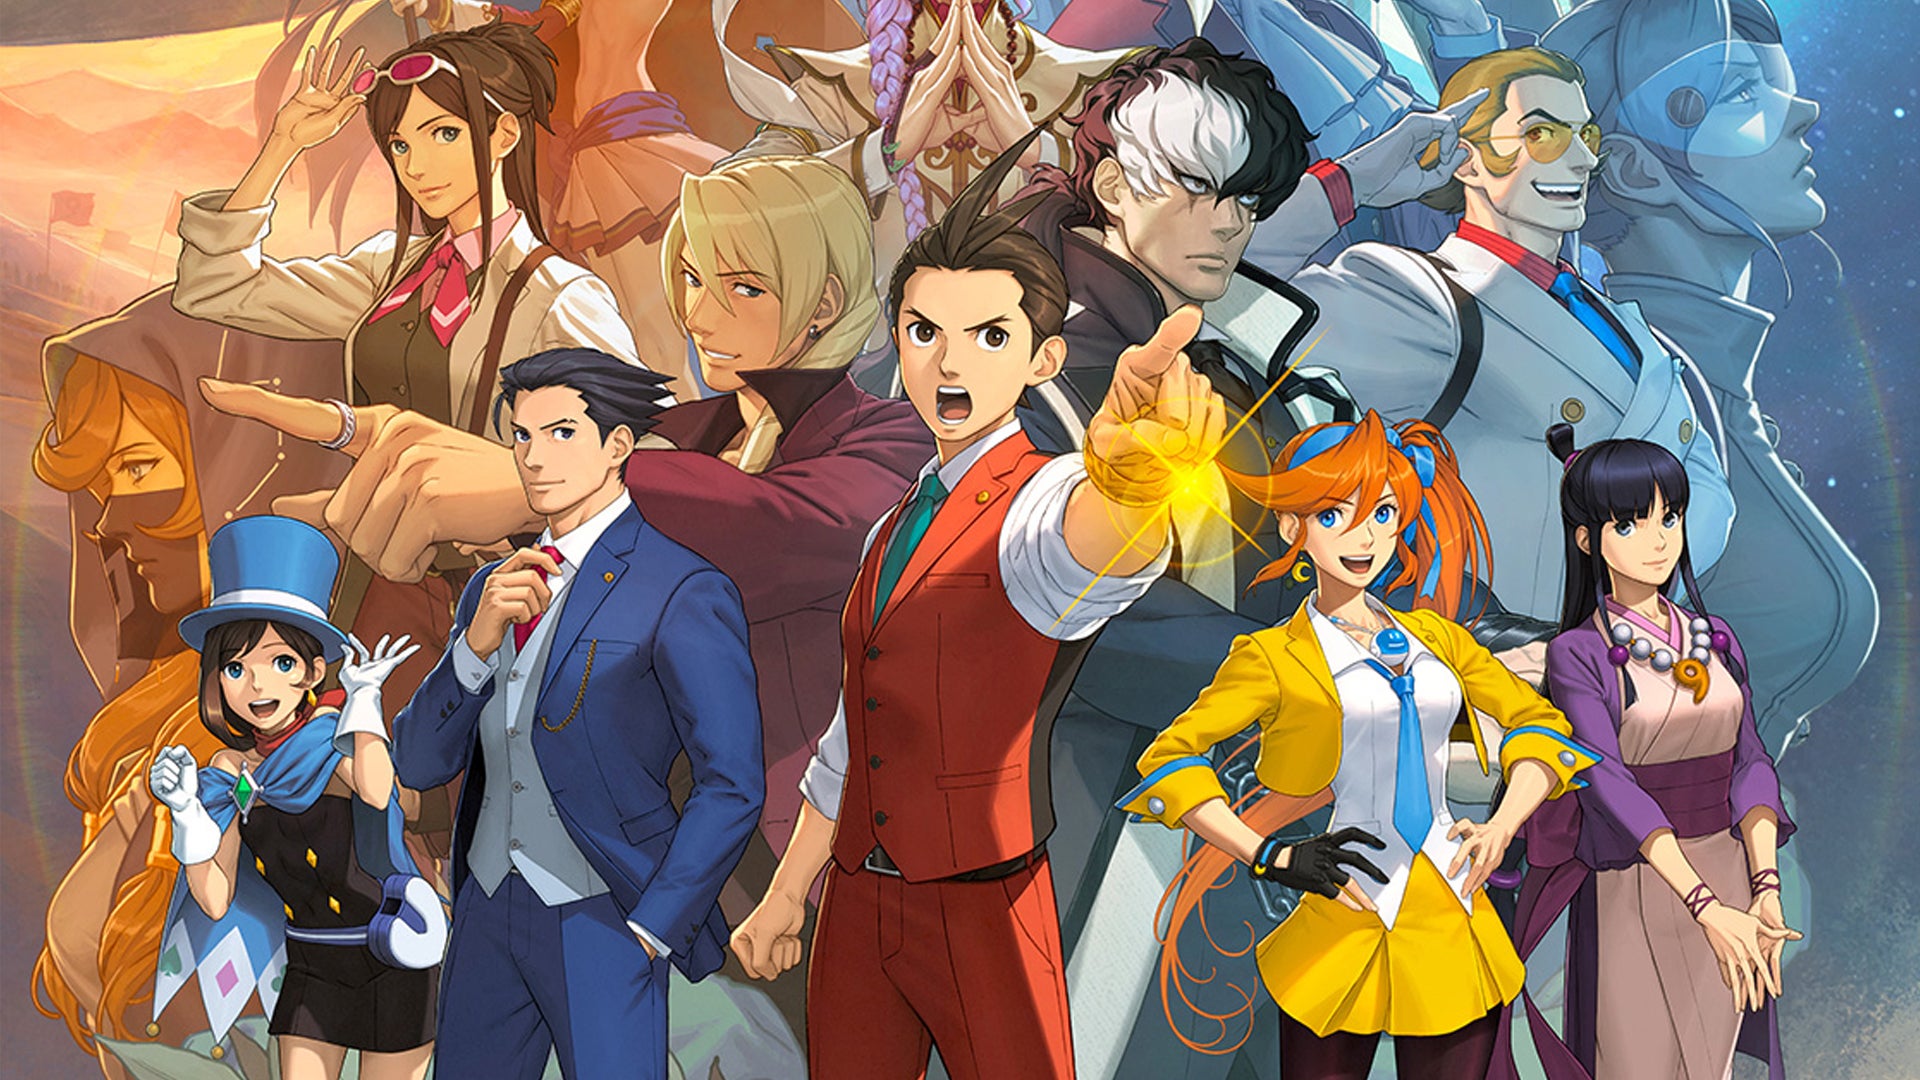 Ace Attorney Anime Airs April 2nd - Character Designs & First Commercial  Revealed - Otaku Tale